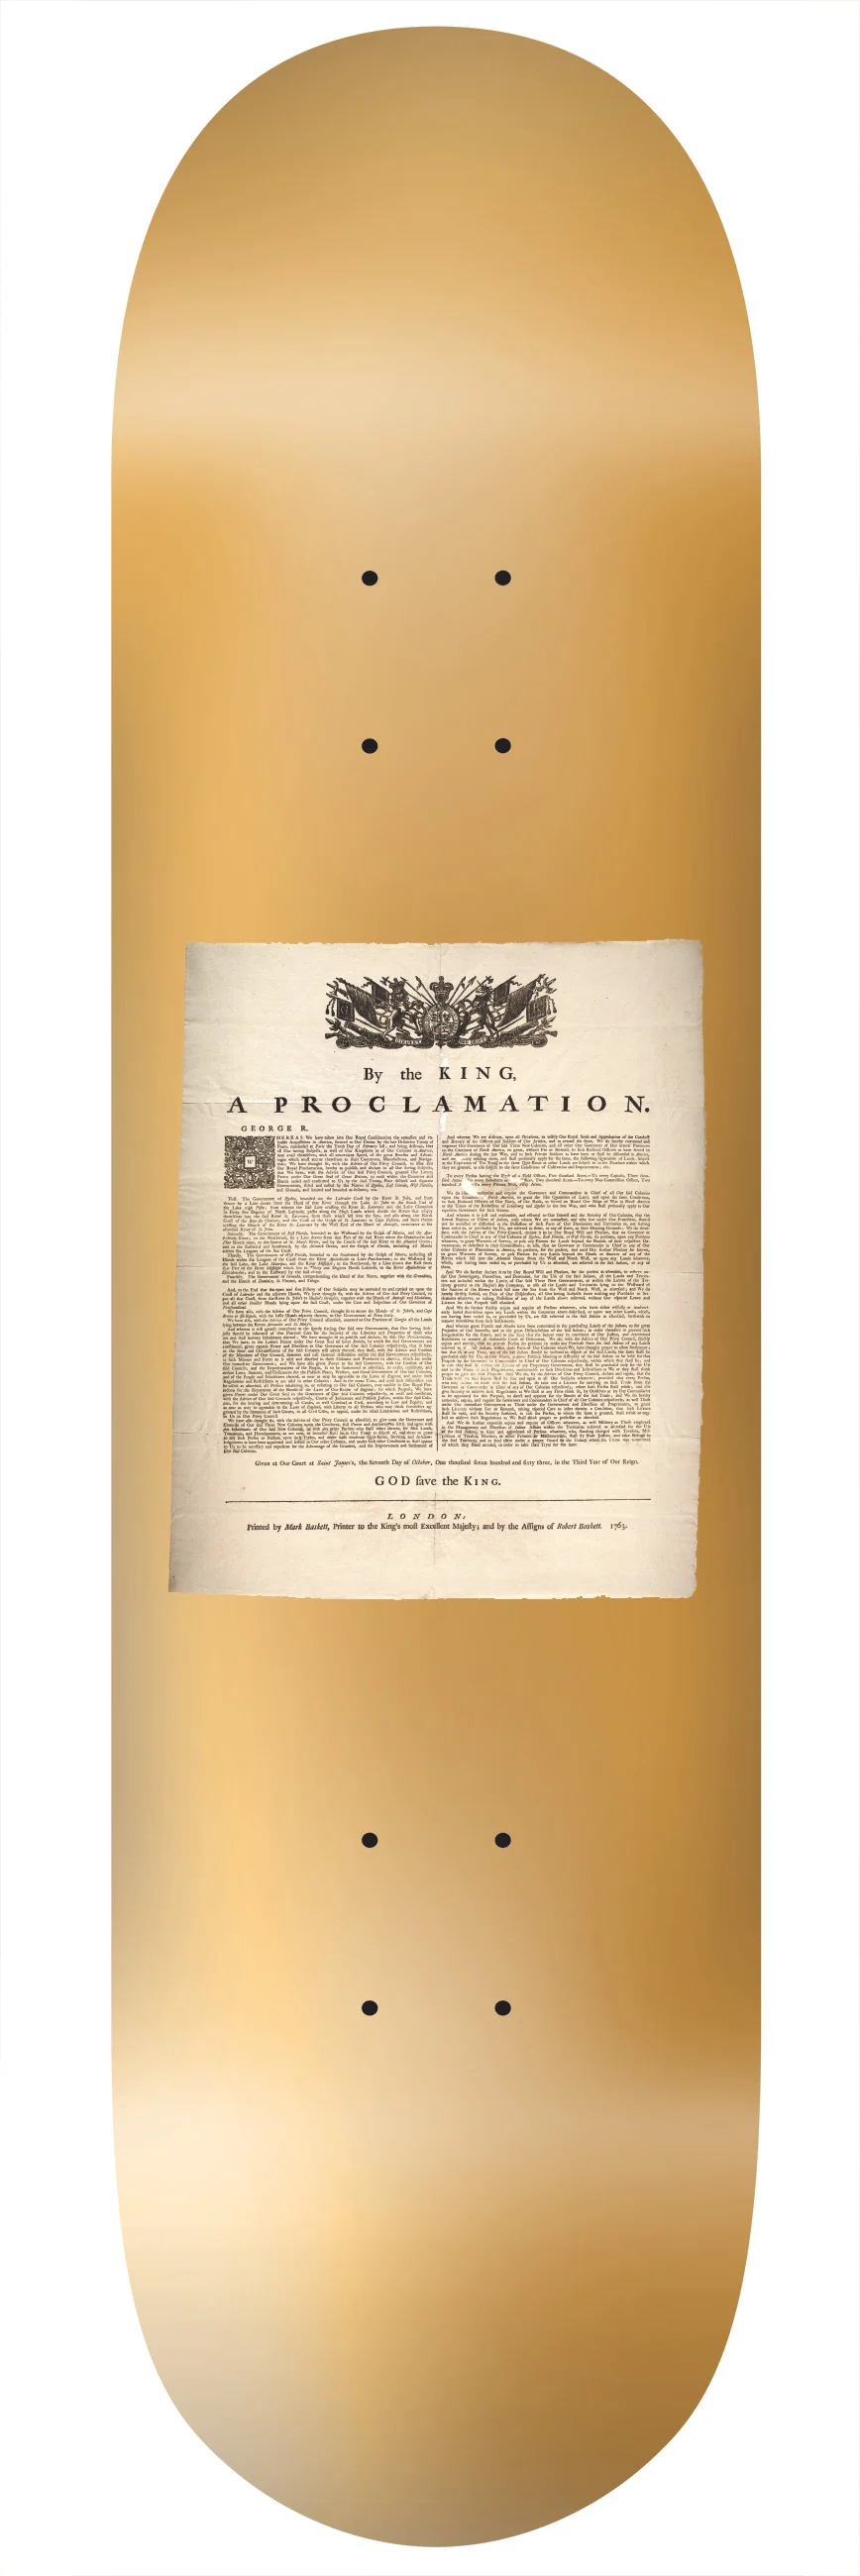 THE ROYAL PROCLAMATION OF 1763